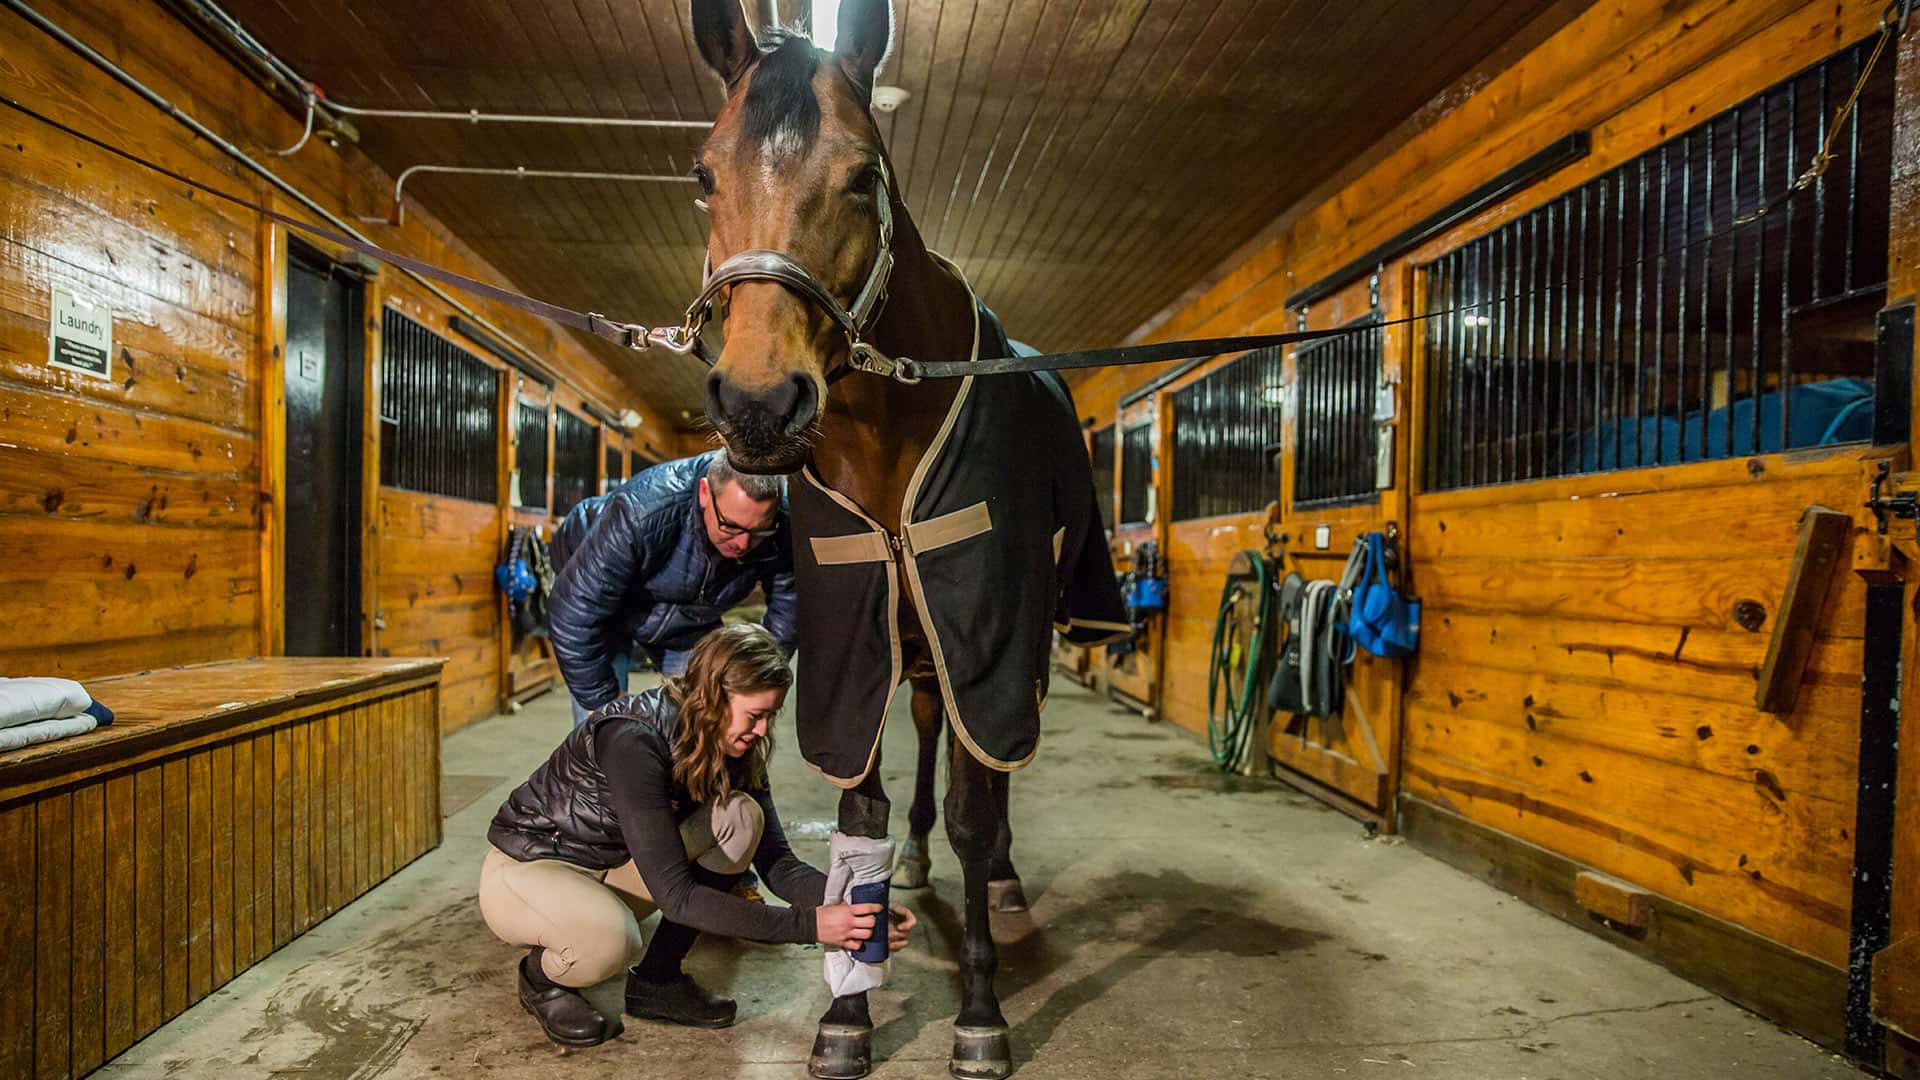 Practing how to properly put a bandage on a horse.